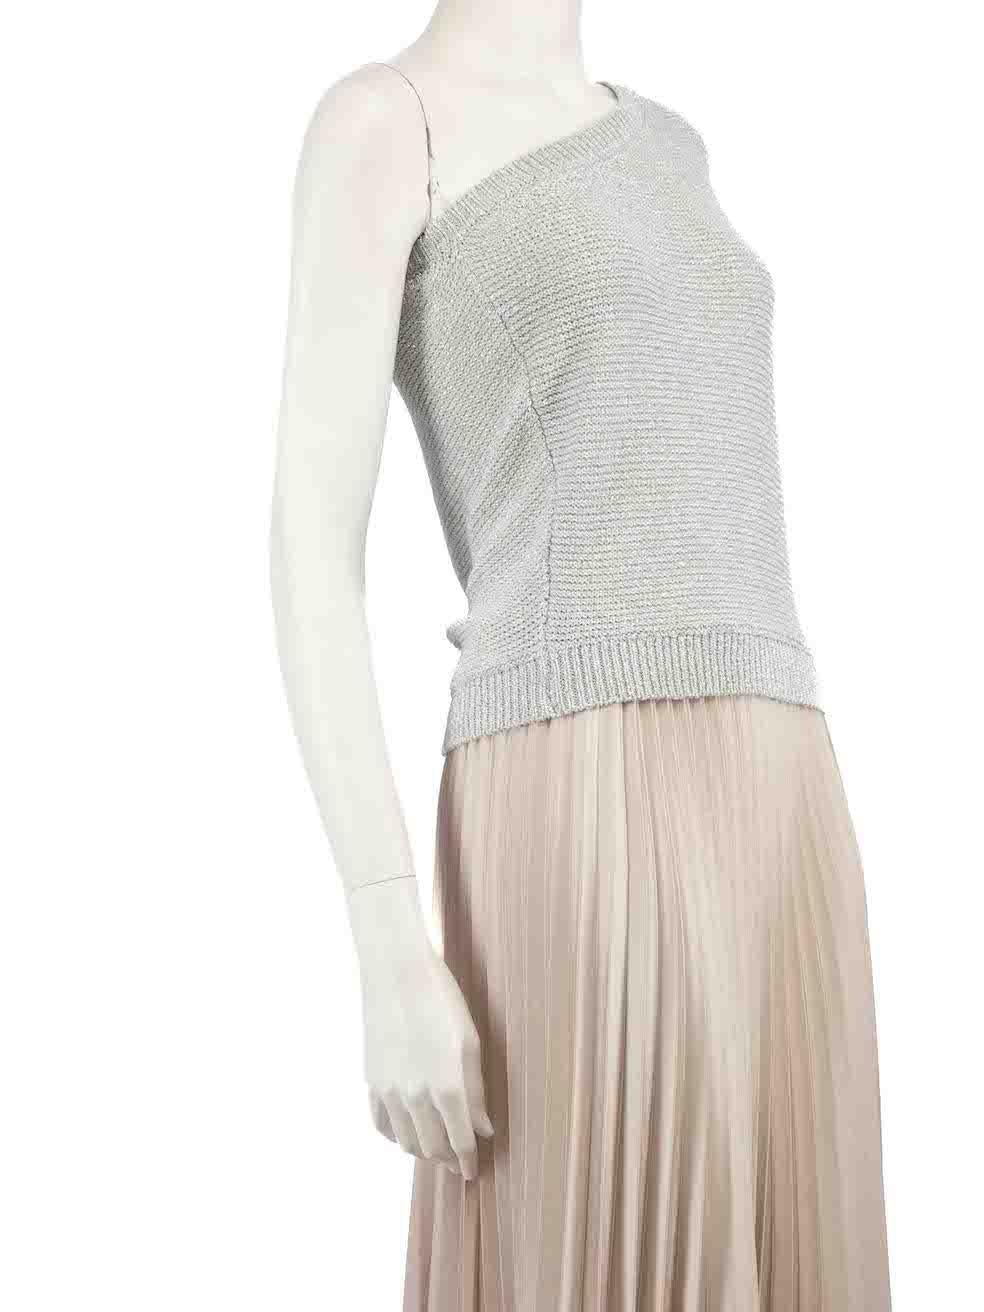 CONDITION is Never worn. No visible wear to top is evident on this new Ba&sh designer resale item.
 
 Details
 Silver
 Viscose
 Knit top
 Metallic thread
 One shoulder
 Long sleeve
 
 
 Made in Italy
 
 Composition
 81% Viscose, 19% Fibre metal
 
